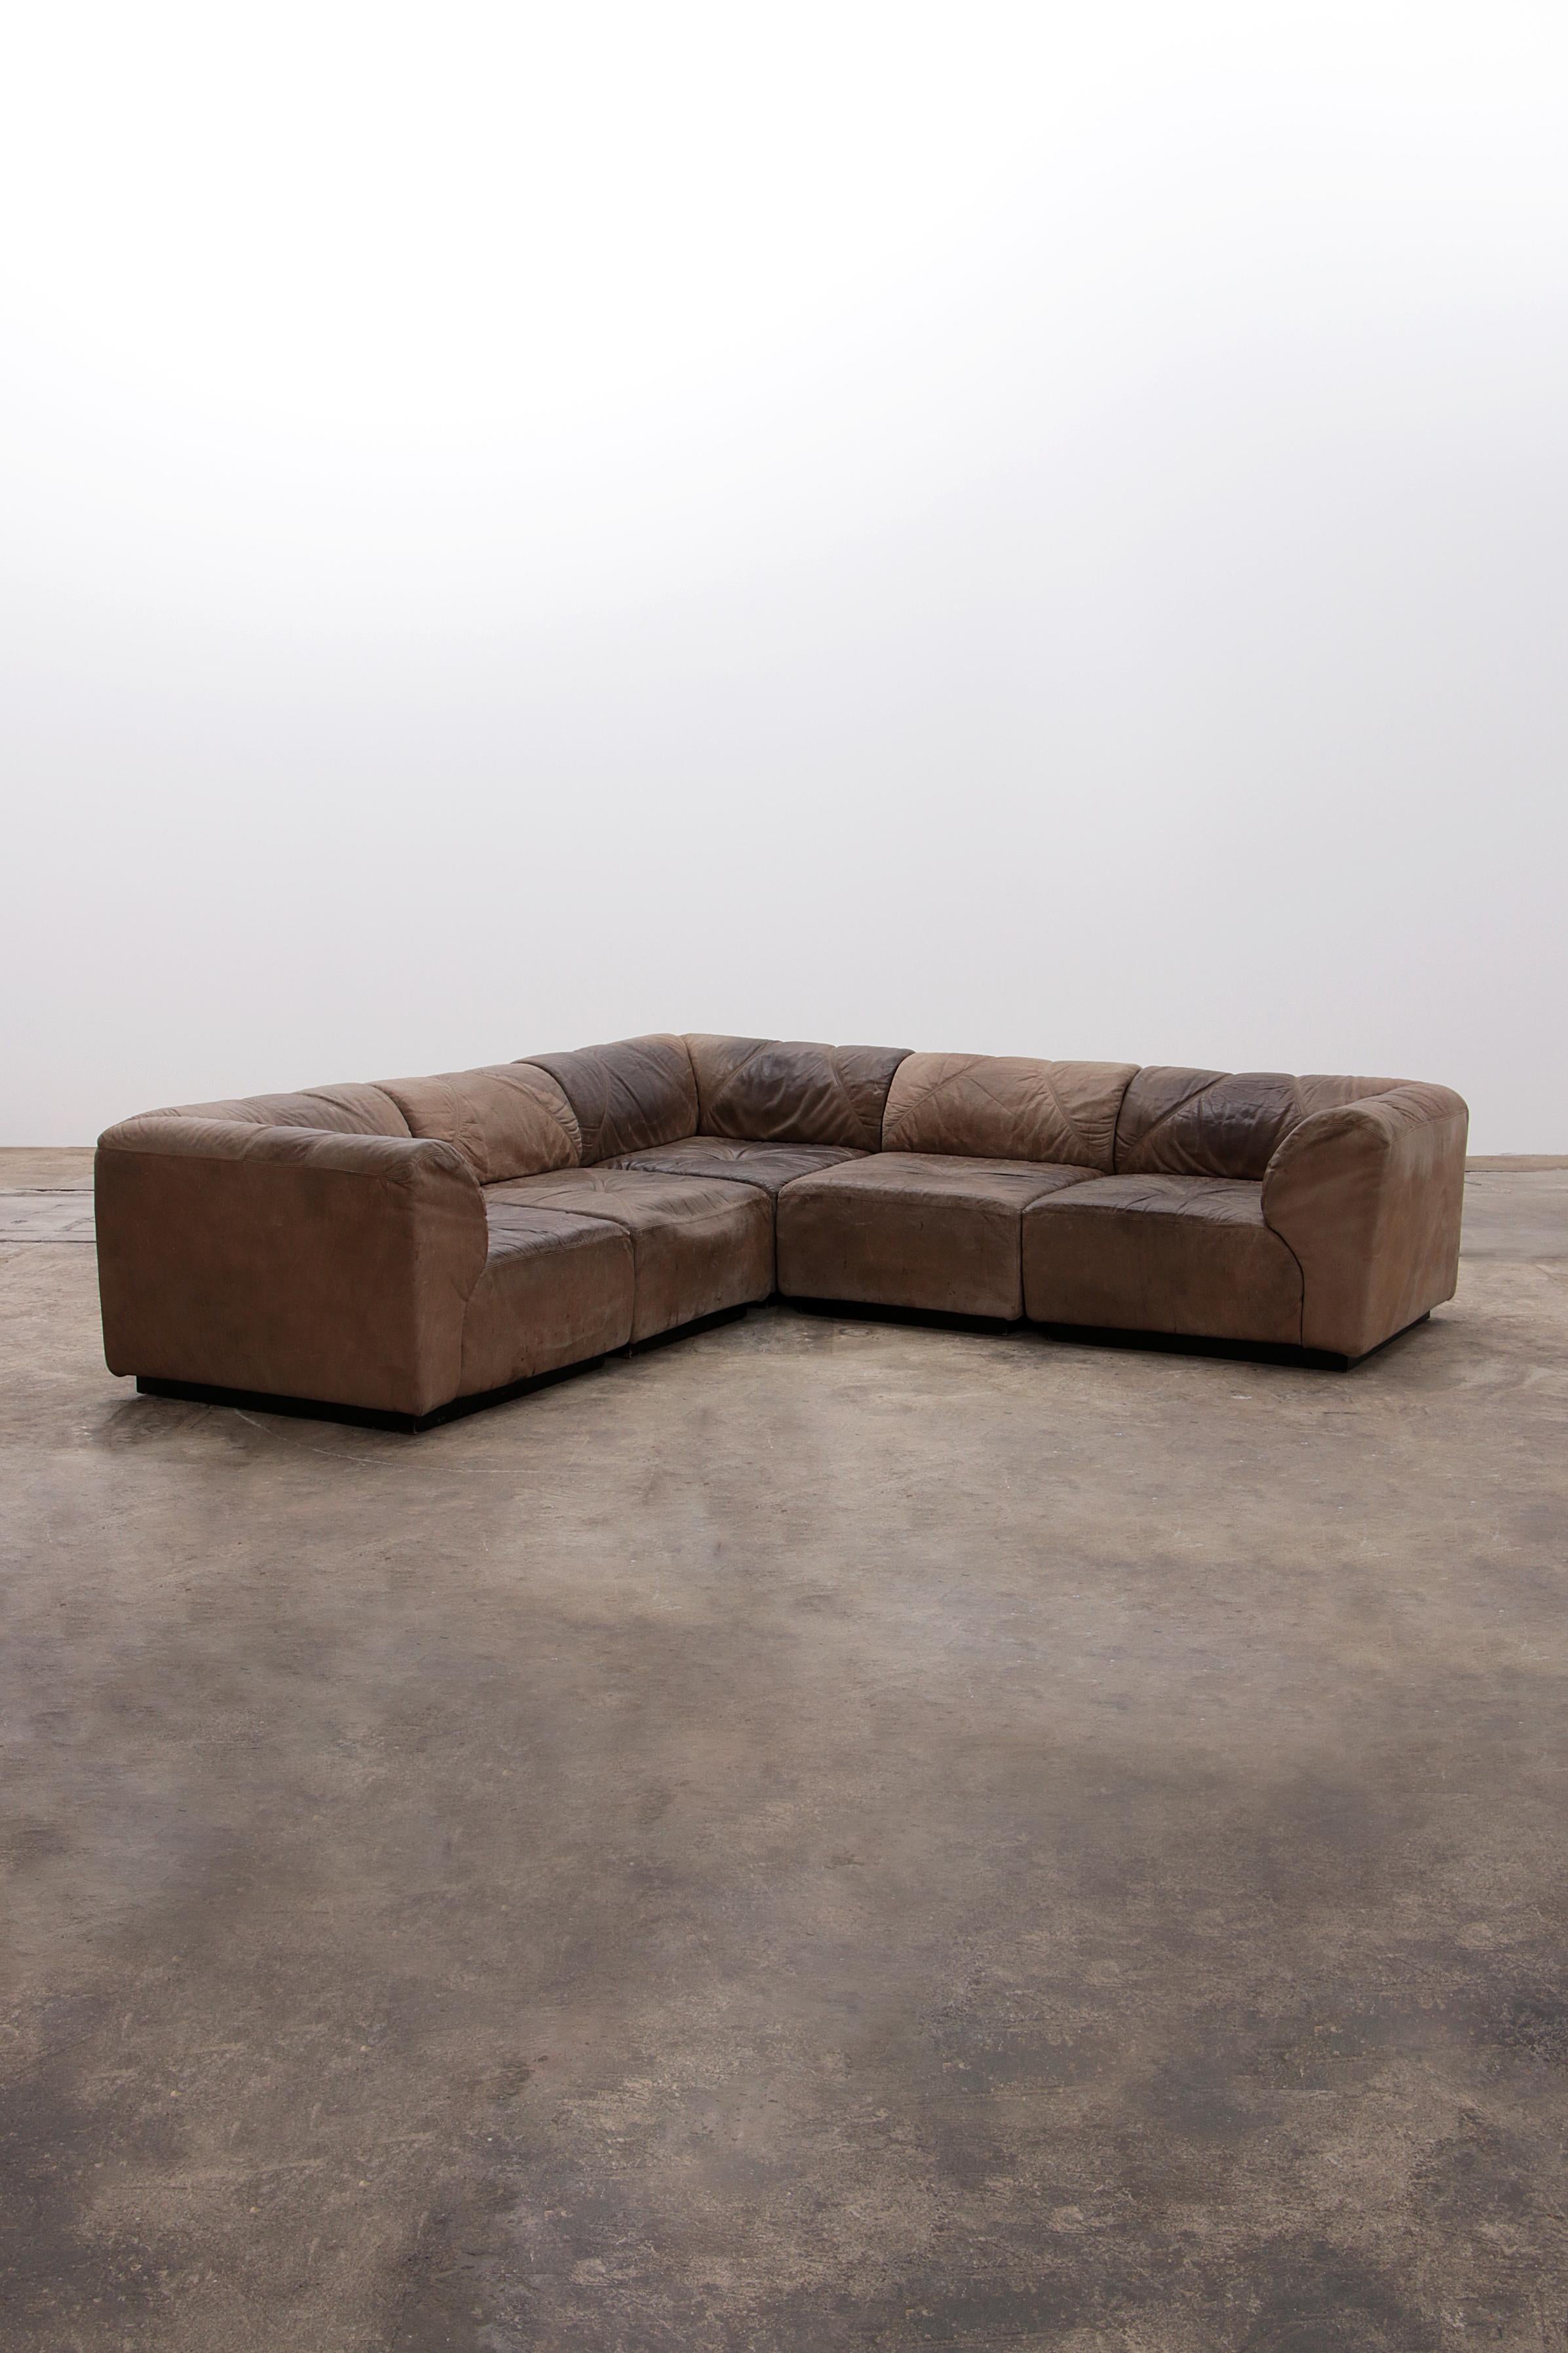 Modular Vintage Leather Sofa by Bernd Münzebrock for Walter Knoll


Discover the timeless elegance and exceptional comfort of the modular vintage leather sofa designed by Bernd Münzebrock for Walter Knoll. Crafted in Germany in the 1970s, this